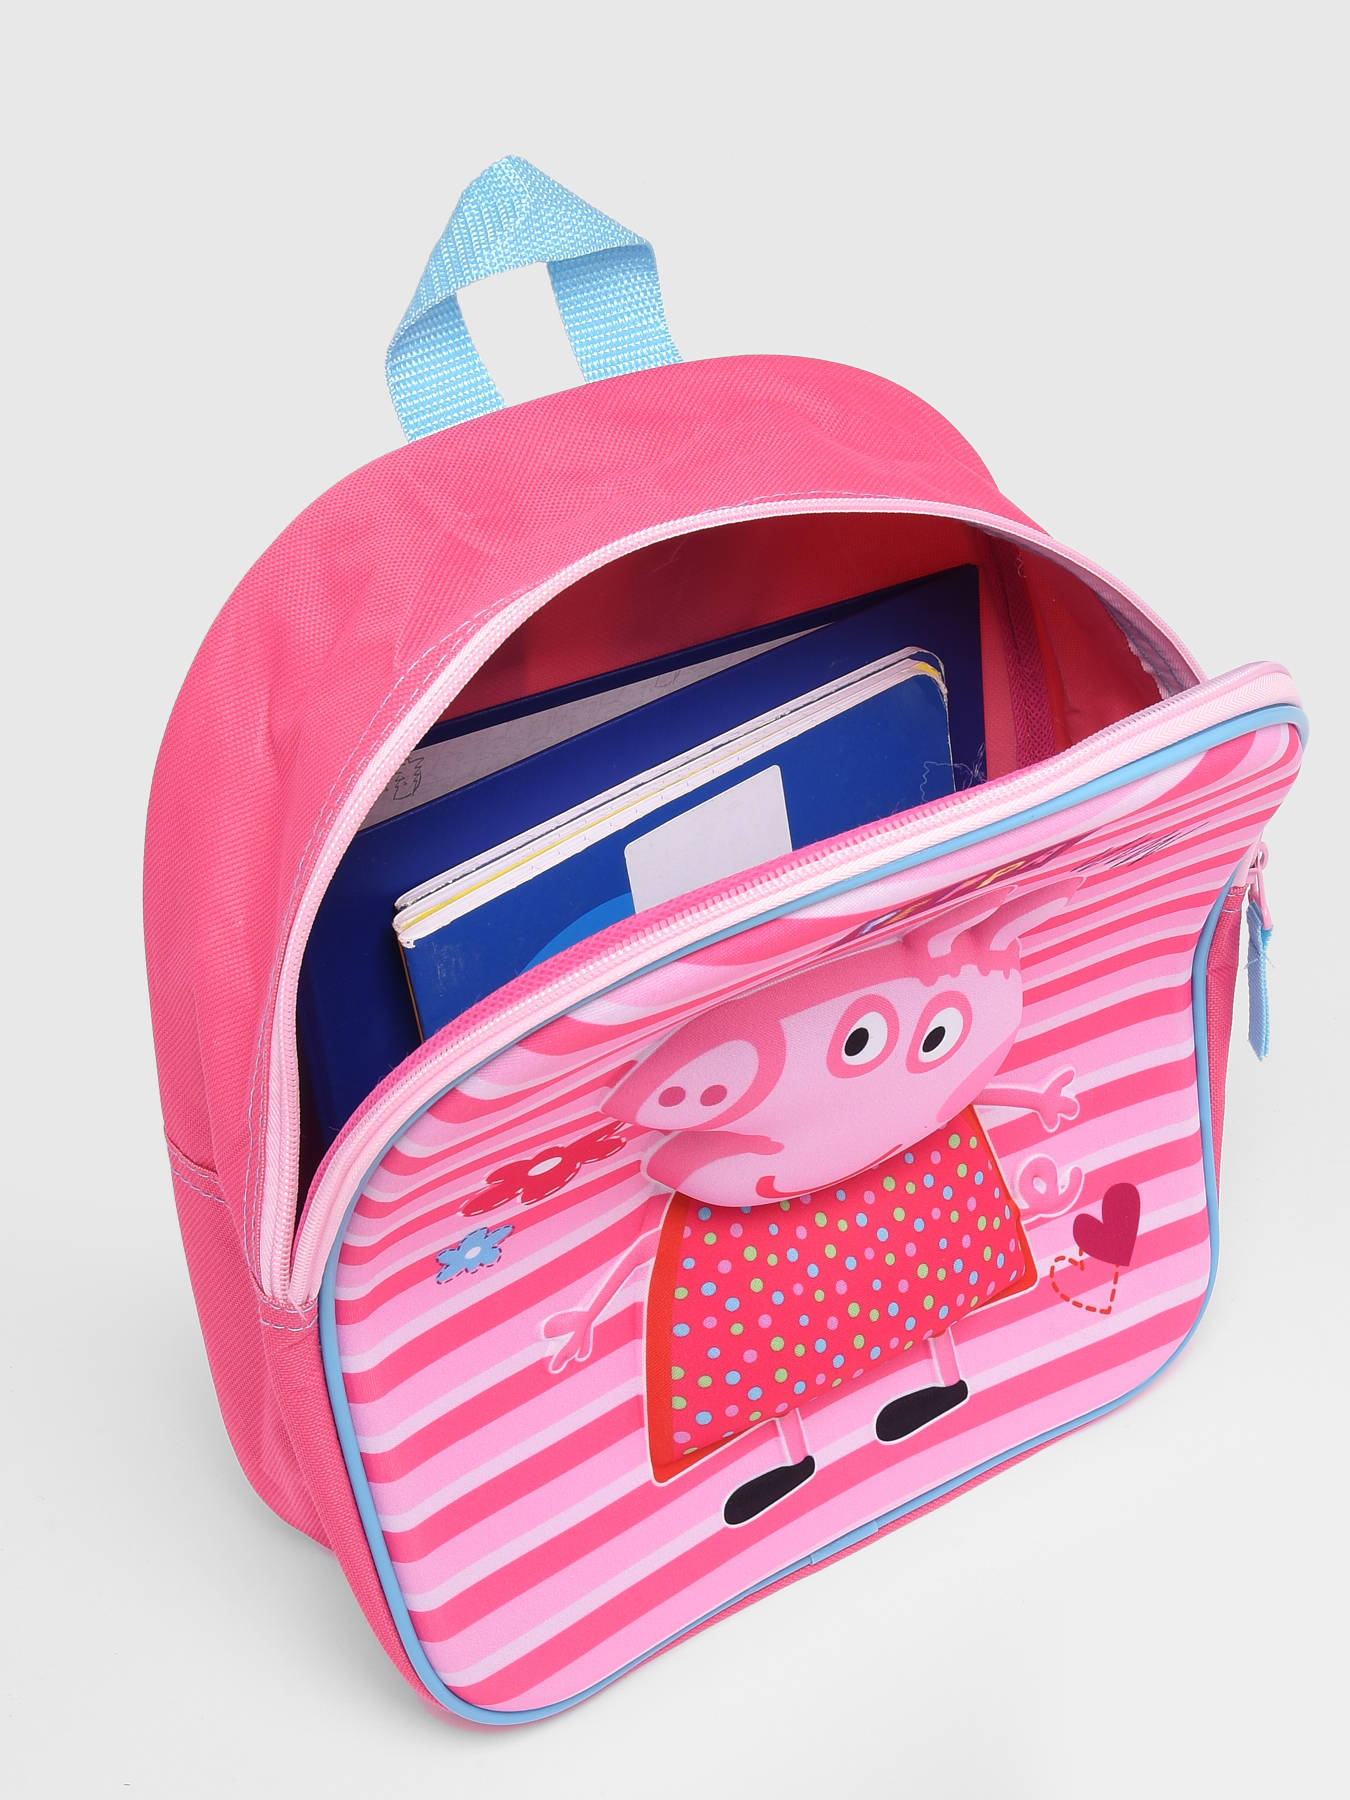 Peppa Pig plush backpack for a girl, pink | 8427934536269 | Zizito.com